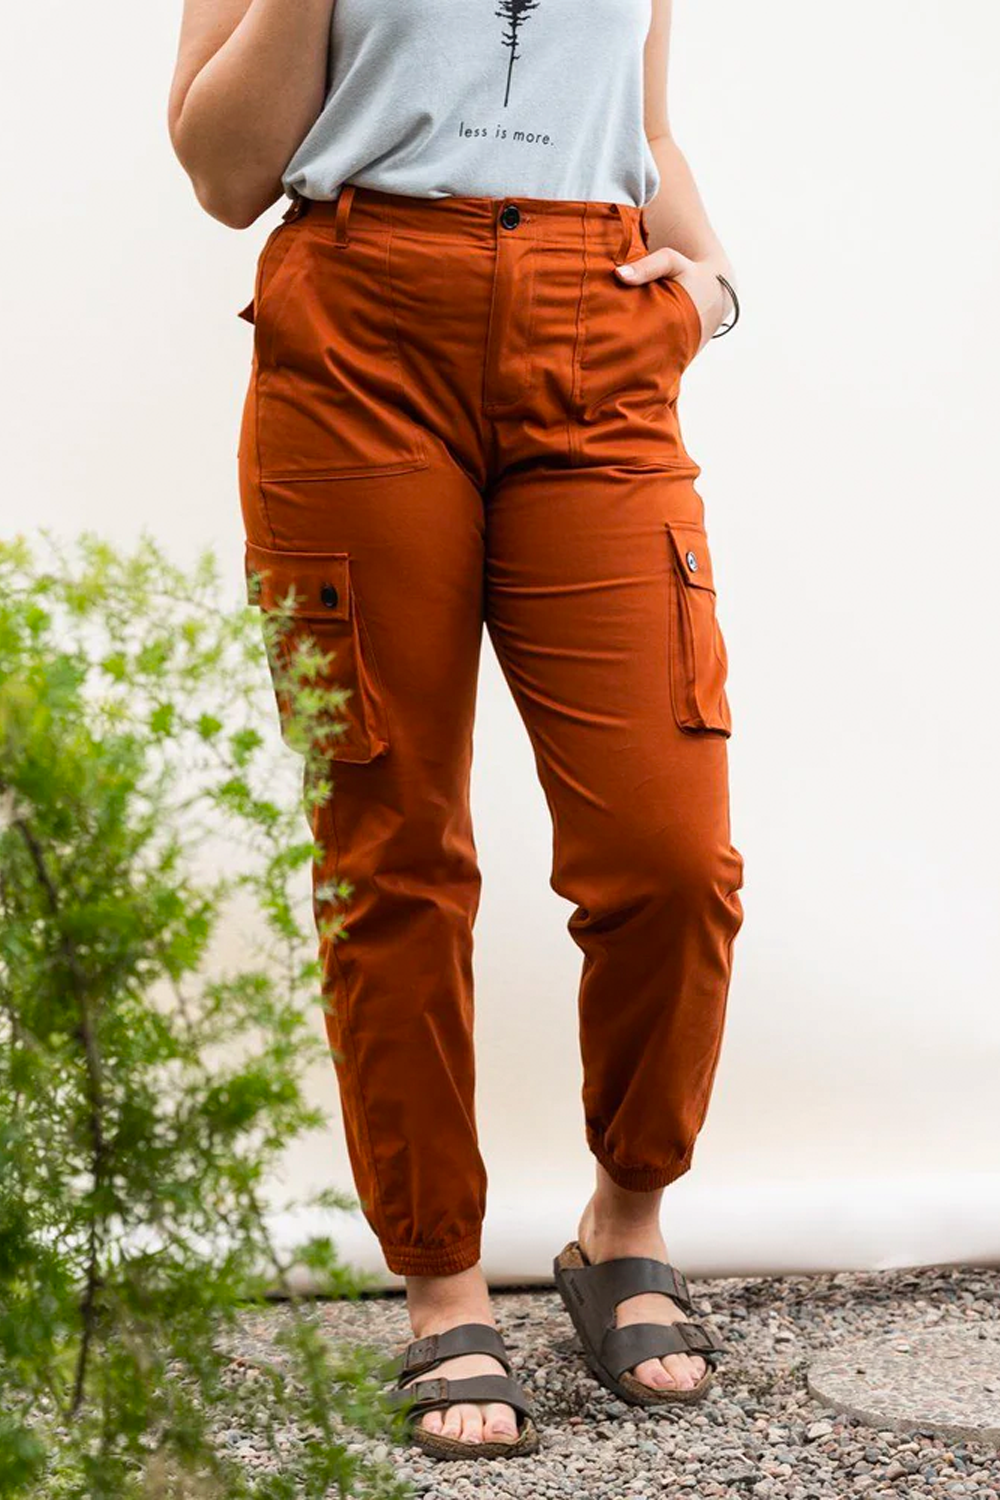 BIPOC woman in orange brown cargo outdoor hiking camping pants and tank top #color_burnt sienna